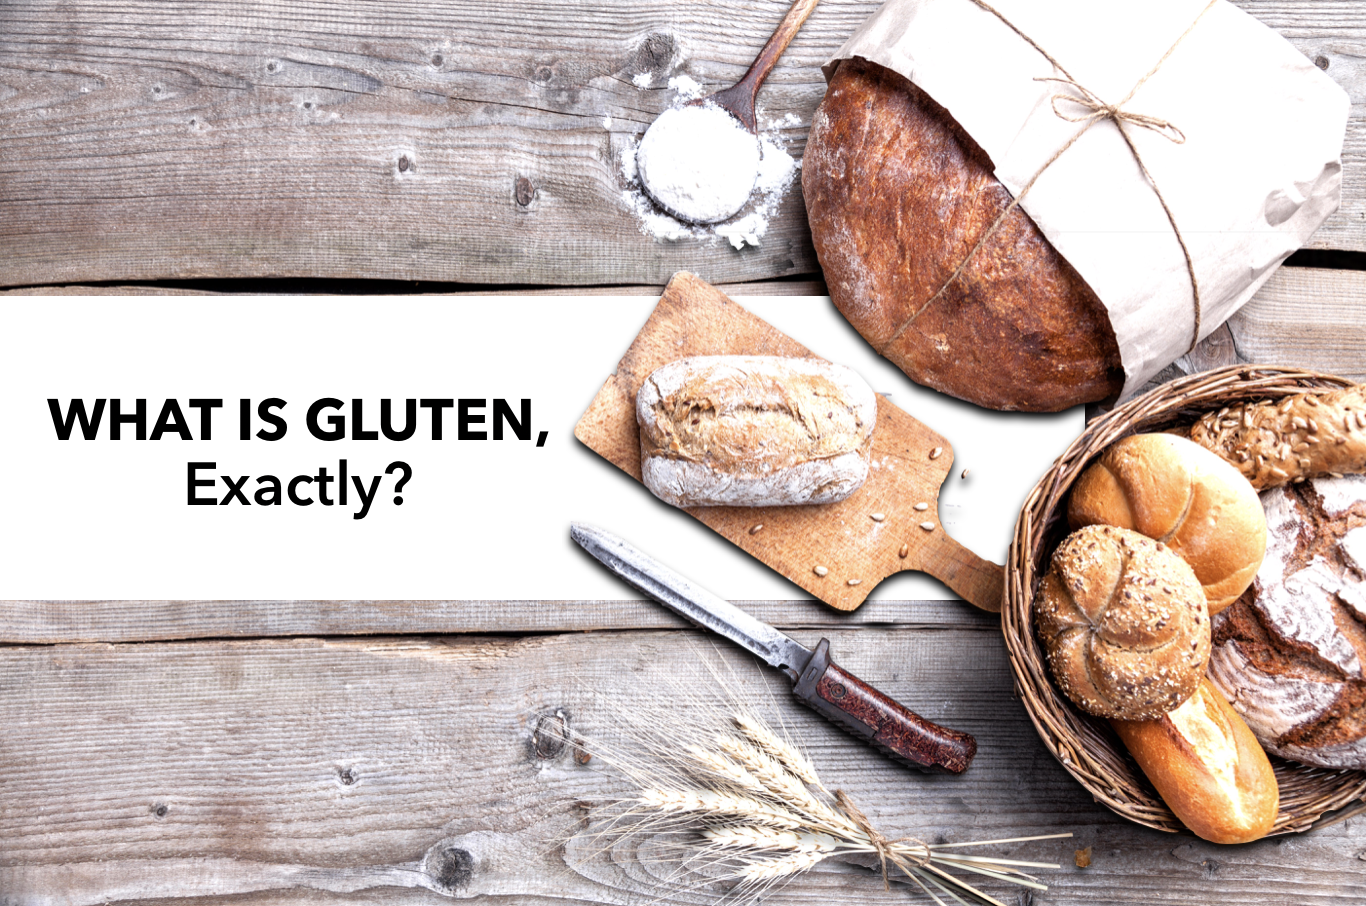 What is Gluten? exactly